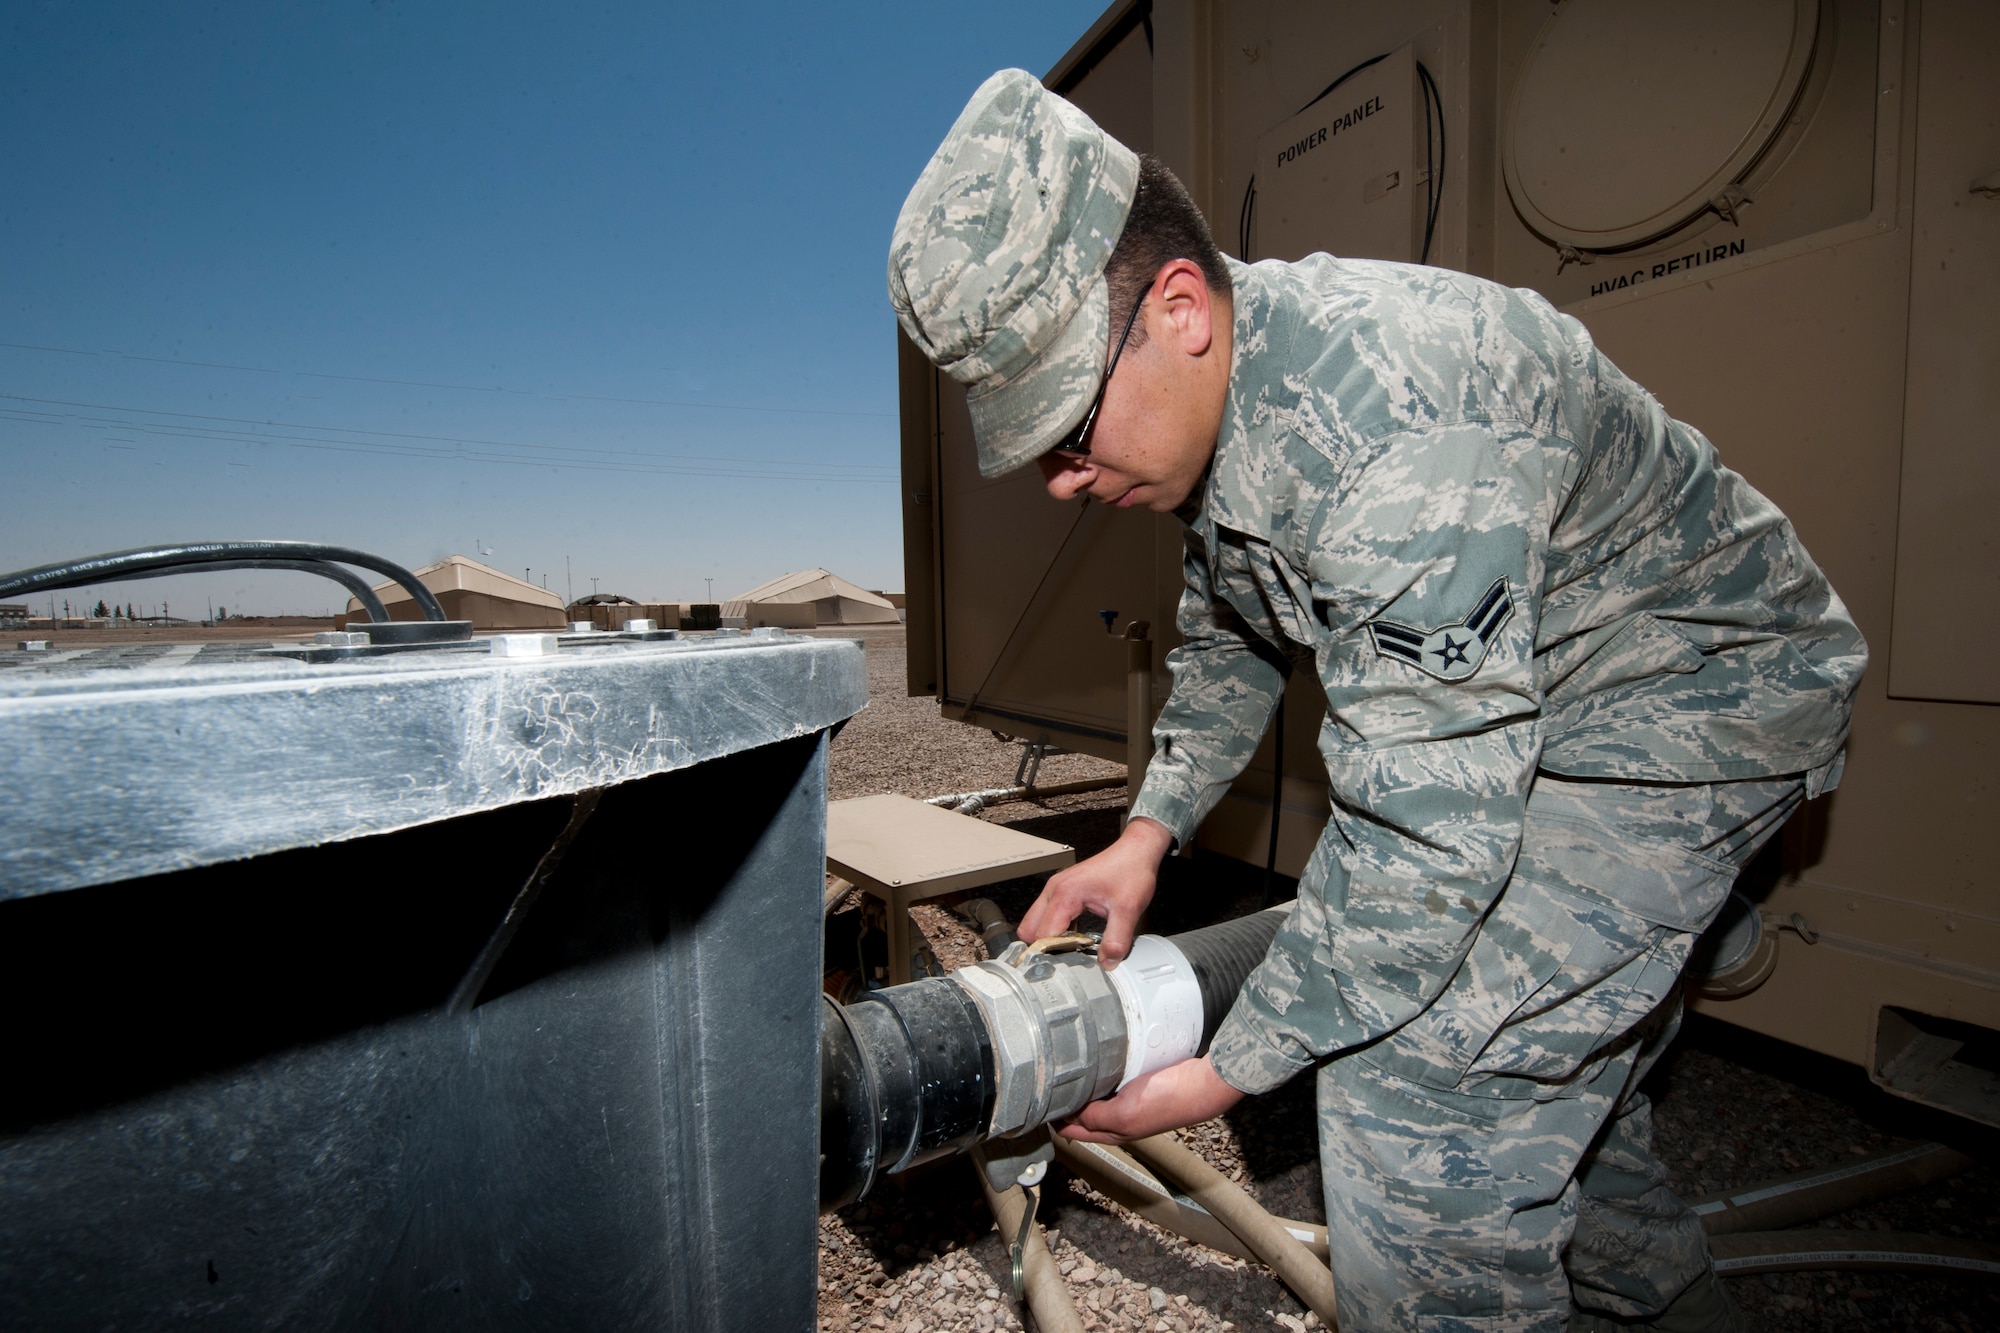 Airman 1st Class Trevor Dickerson, 49th Materiel Maintenance Squadron water and fuels system maintainer, removes a pump from a macerator used for the new hygiene system at Holloman Air Force Base, N.M., April 24. The 49th MMS was the first unit to receive and test the new hygiene system, complete with latrines and showers, which will eventually be utilized in forward deployed locations. (U.S. Air Force photo by Airman 1st Class Daniel E. Liddicoet)